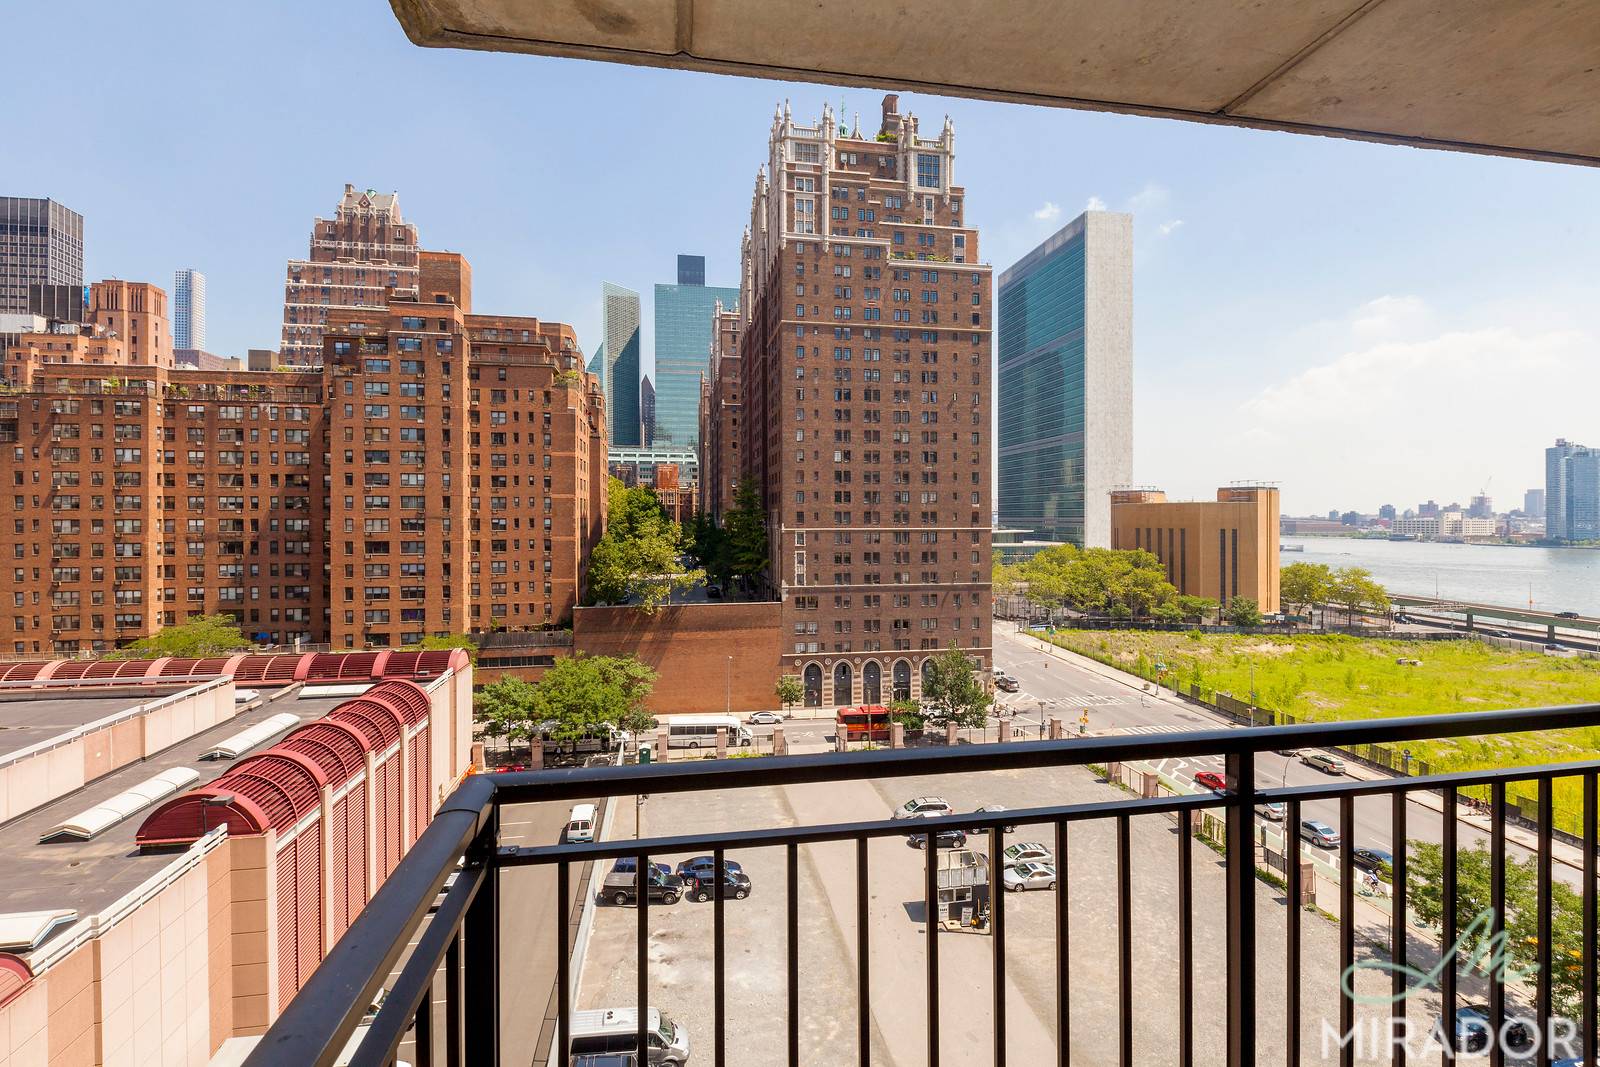 North facing 2 bedroom, 2 bathroom apartment with private balcony amp ; open city and water views at New York Tower.